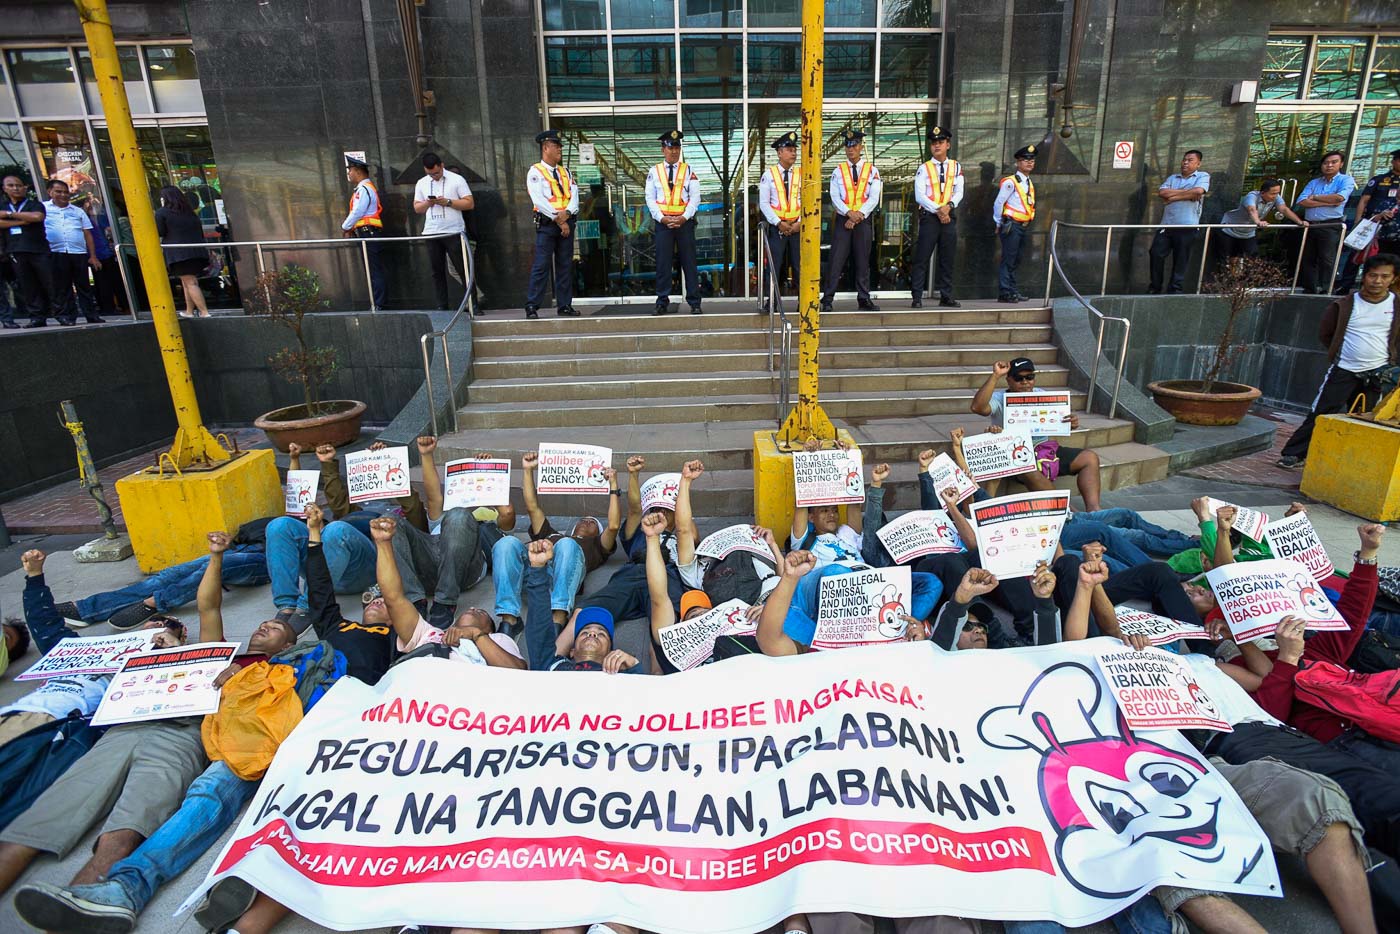 DIE-IN PROTEST. Laid-off agency workers contracted by Jollibee Foods Corporation (JFC) stage a protest in front of the fastfood's main corporate headquarters in Pasig City on June 28, 2018. Photo by Maria Tan/Rappler  